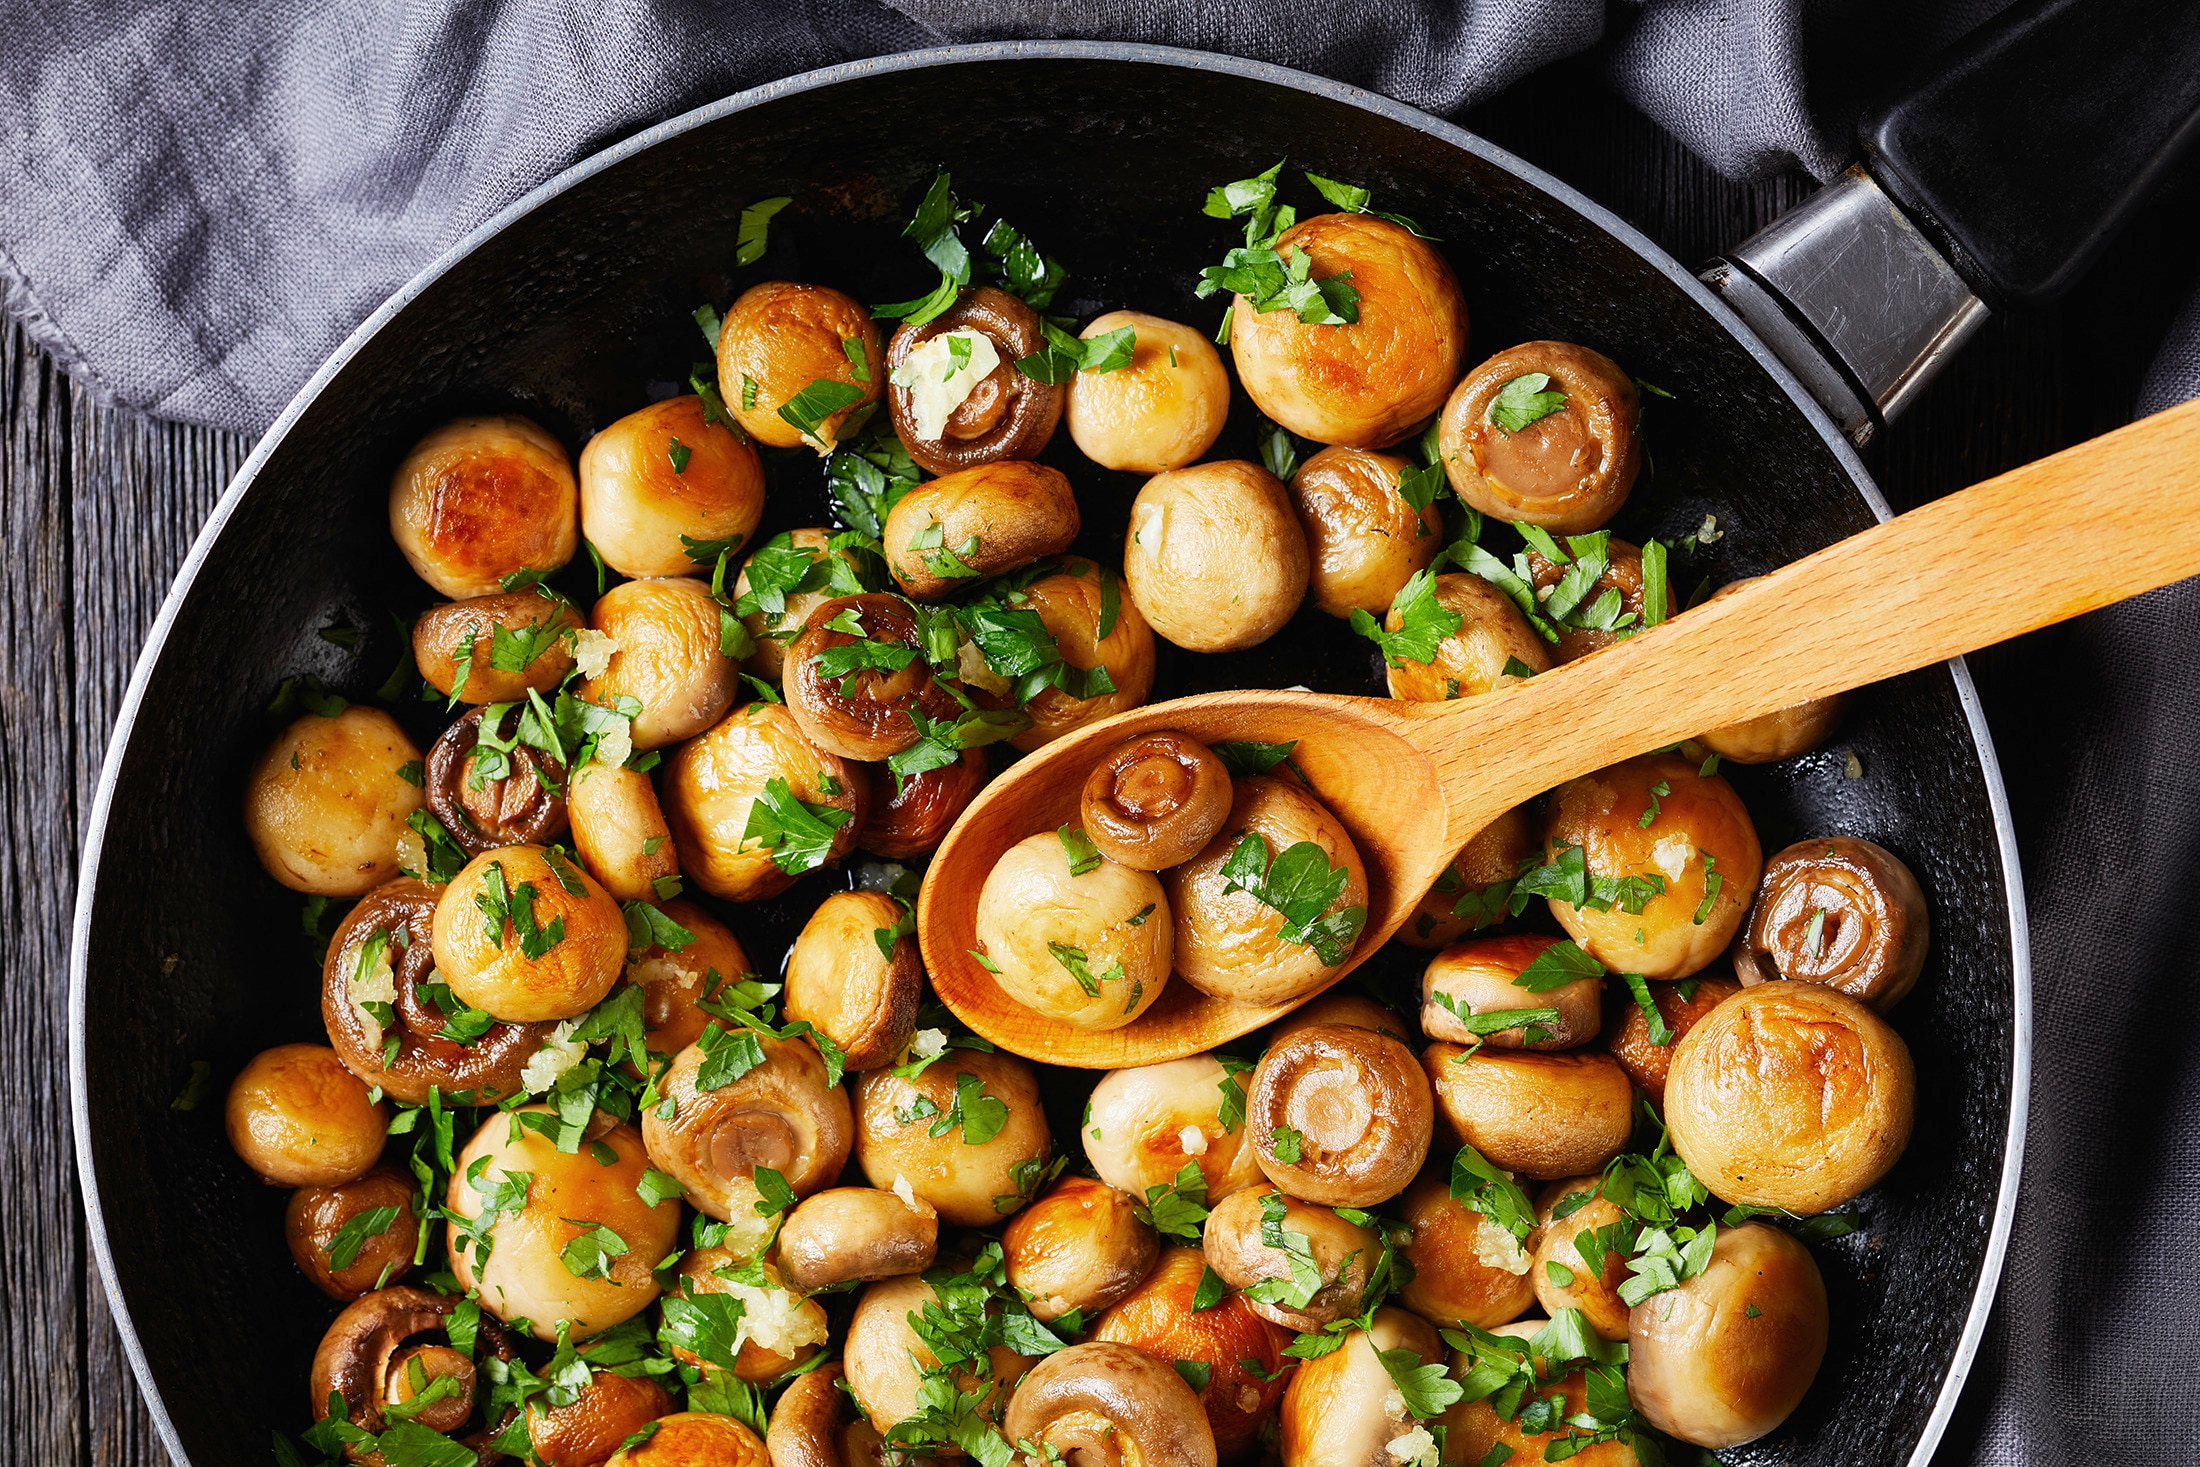 A frying pan with button mushrooms in garlic and herbs